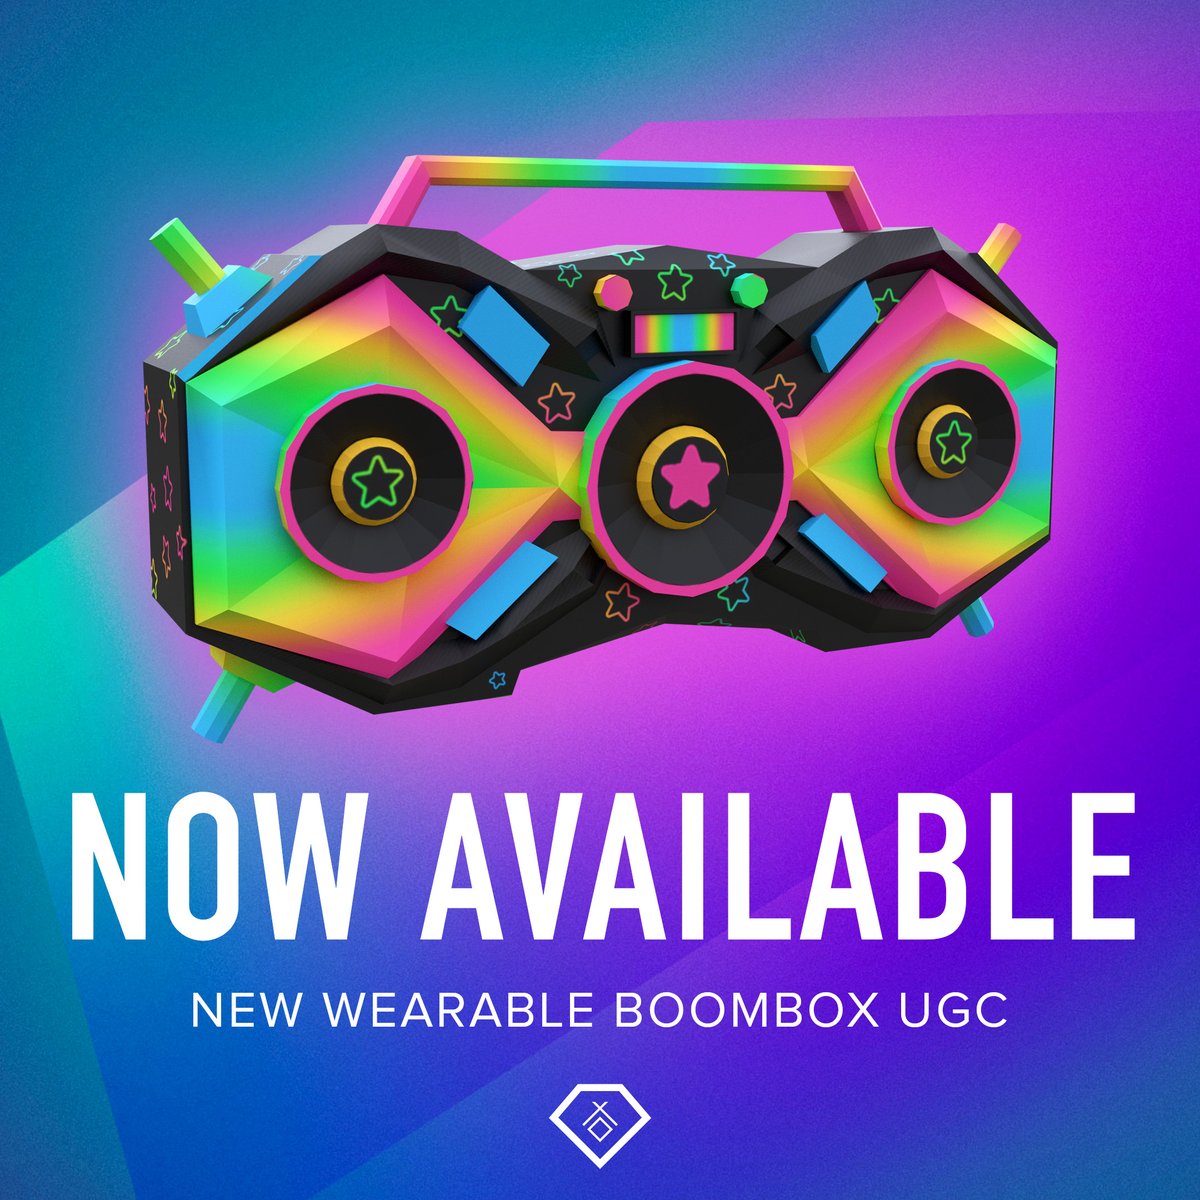 We are happy to announce that Catalog Avatar Creator has partnered with @RELICSxyz to bring a new boombox/music player to the game, containing music from @Monstercat! 🎵 Everybody has access to a FREE playlist with 10 songs, but you can unlock 3 extra playlists (30 songs) by